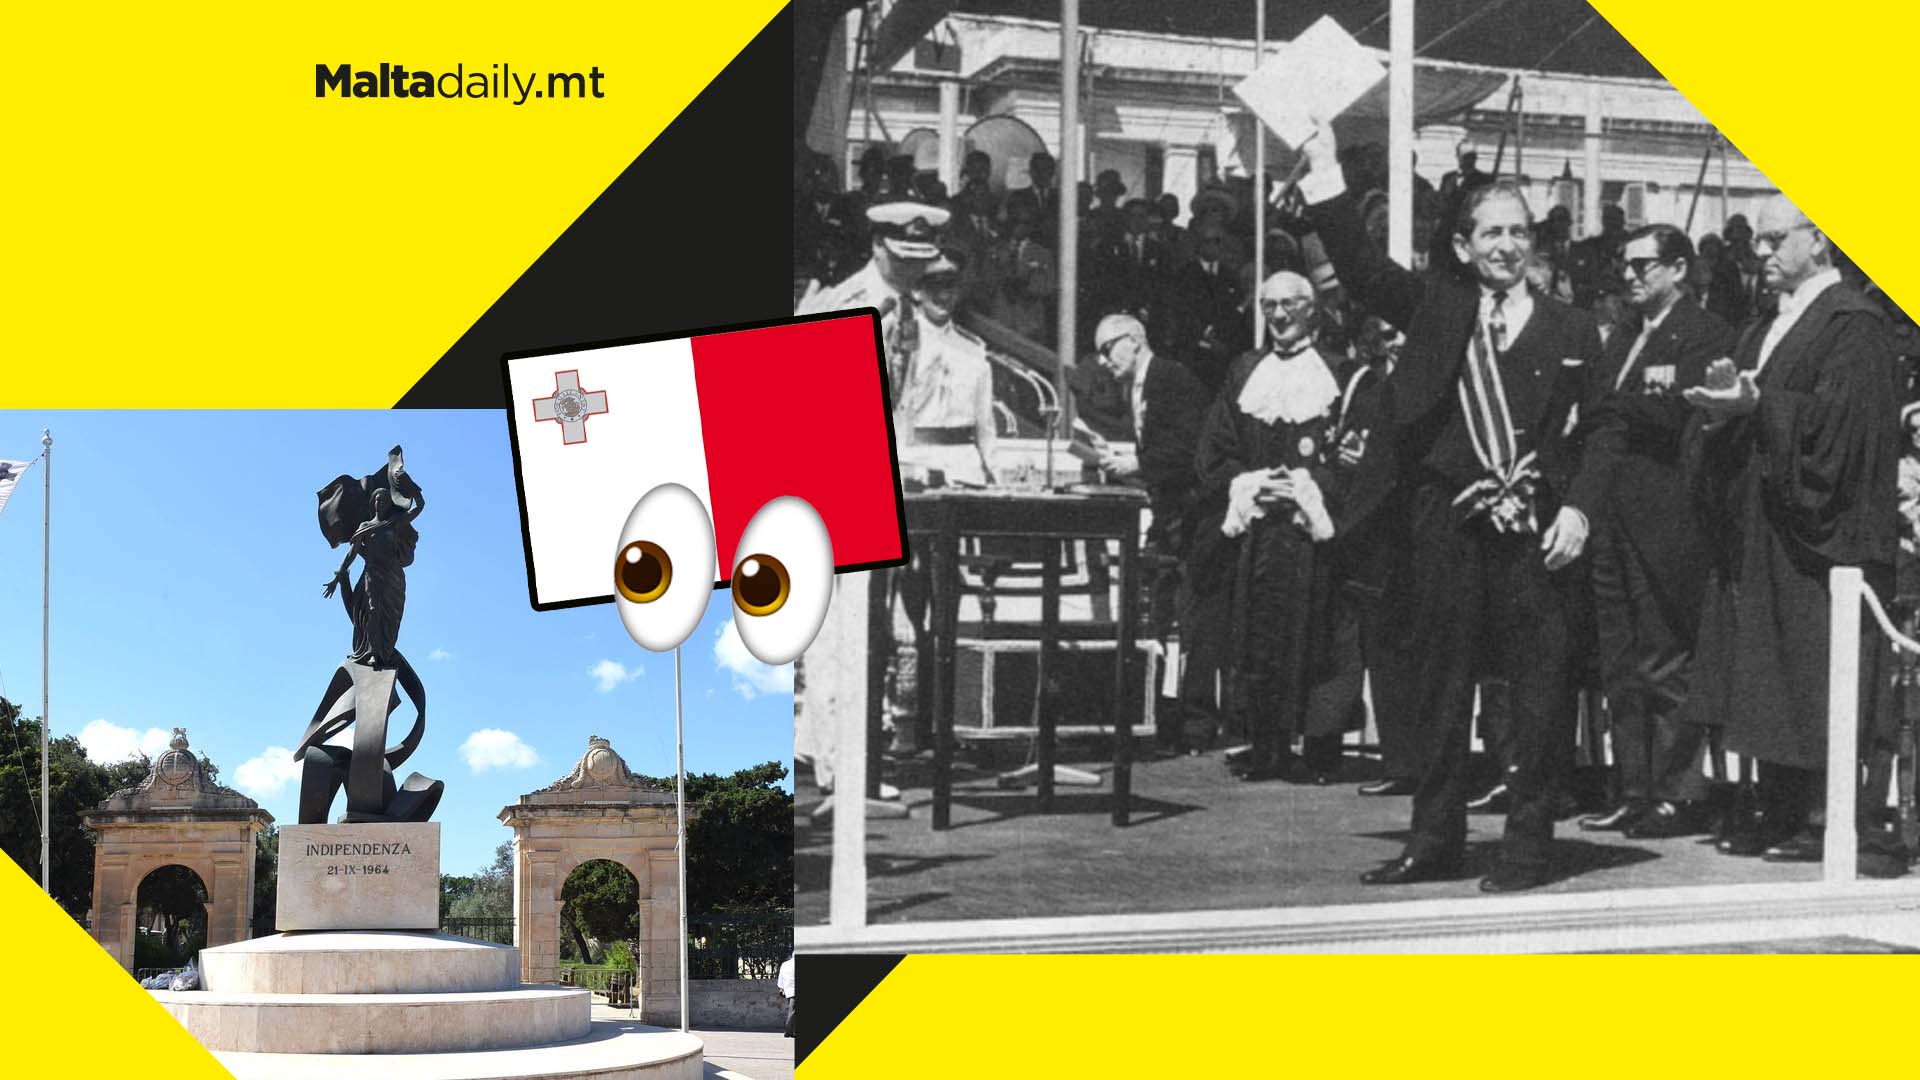 Here are some facts about Malta’s Independence Day